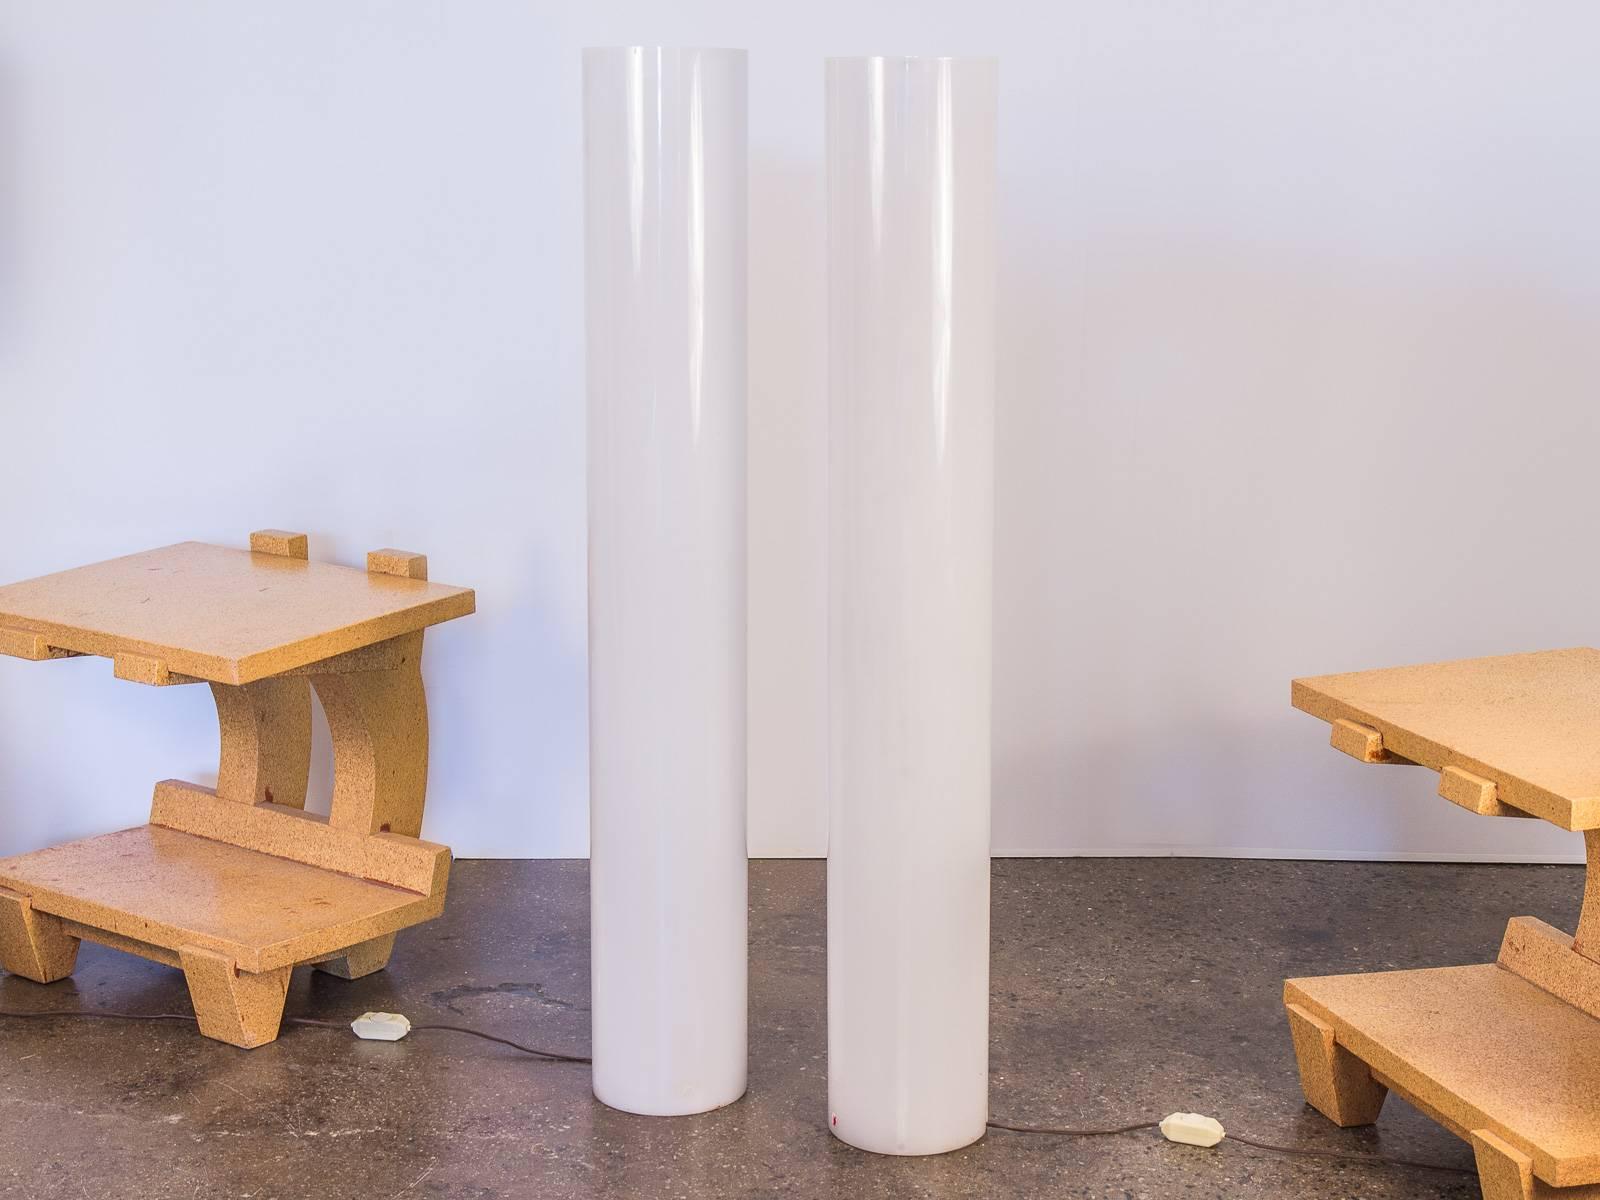 Sold as a pair. Column floor lamps by Paul Mayen for Habitat. These architecturally sculptural, clean cylinder floor lamps are stylishly graphic lighting option to adorn a room. White acrylic shades cover a light fixture that holds six bulbs and has